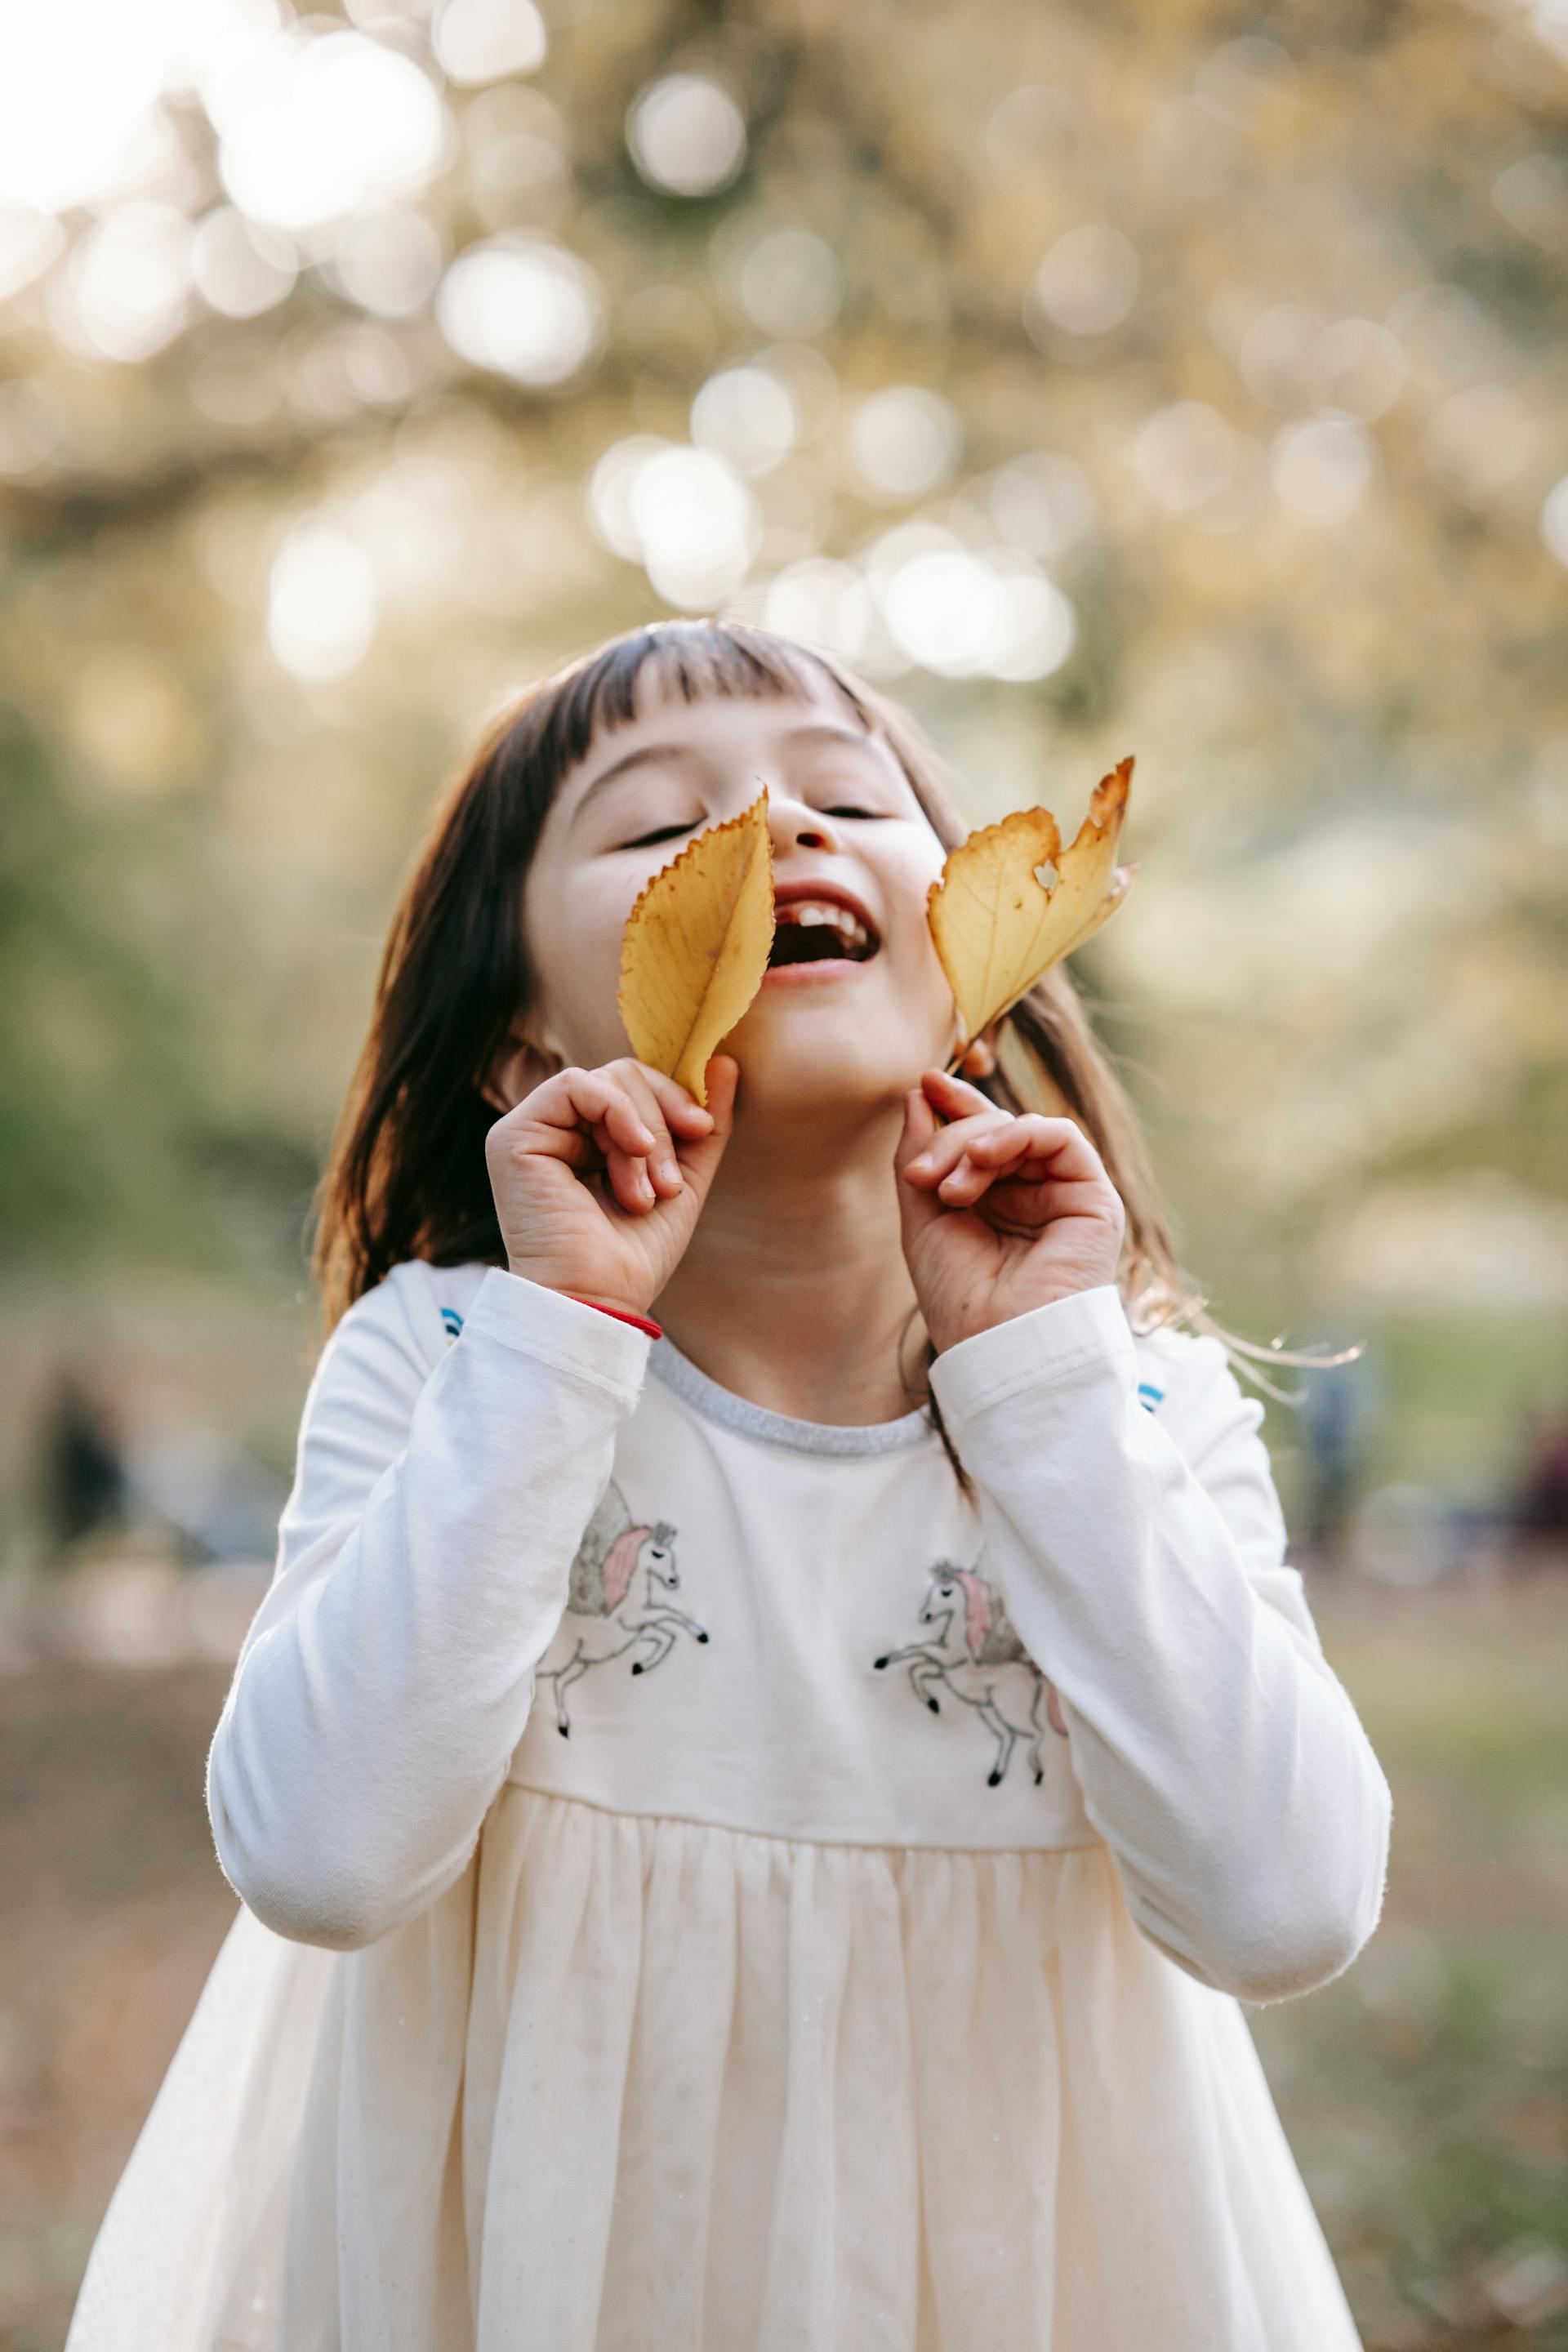 A happy little girl with yellow leaves standing in a park | Source: Pexels